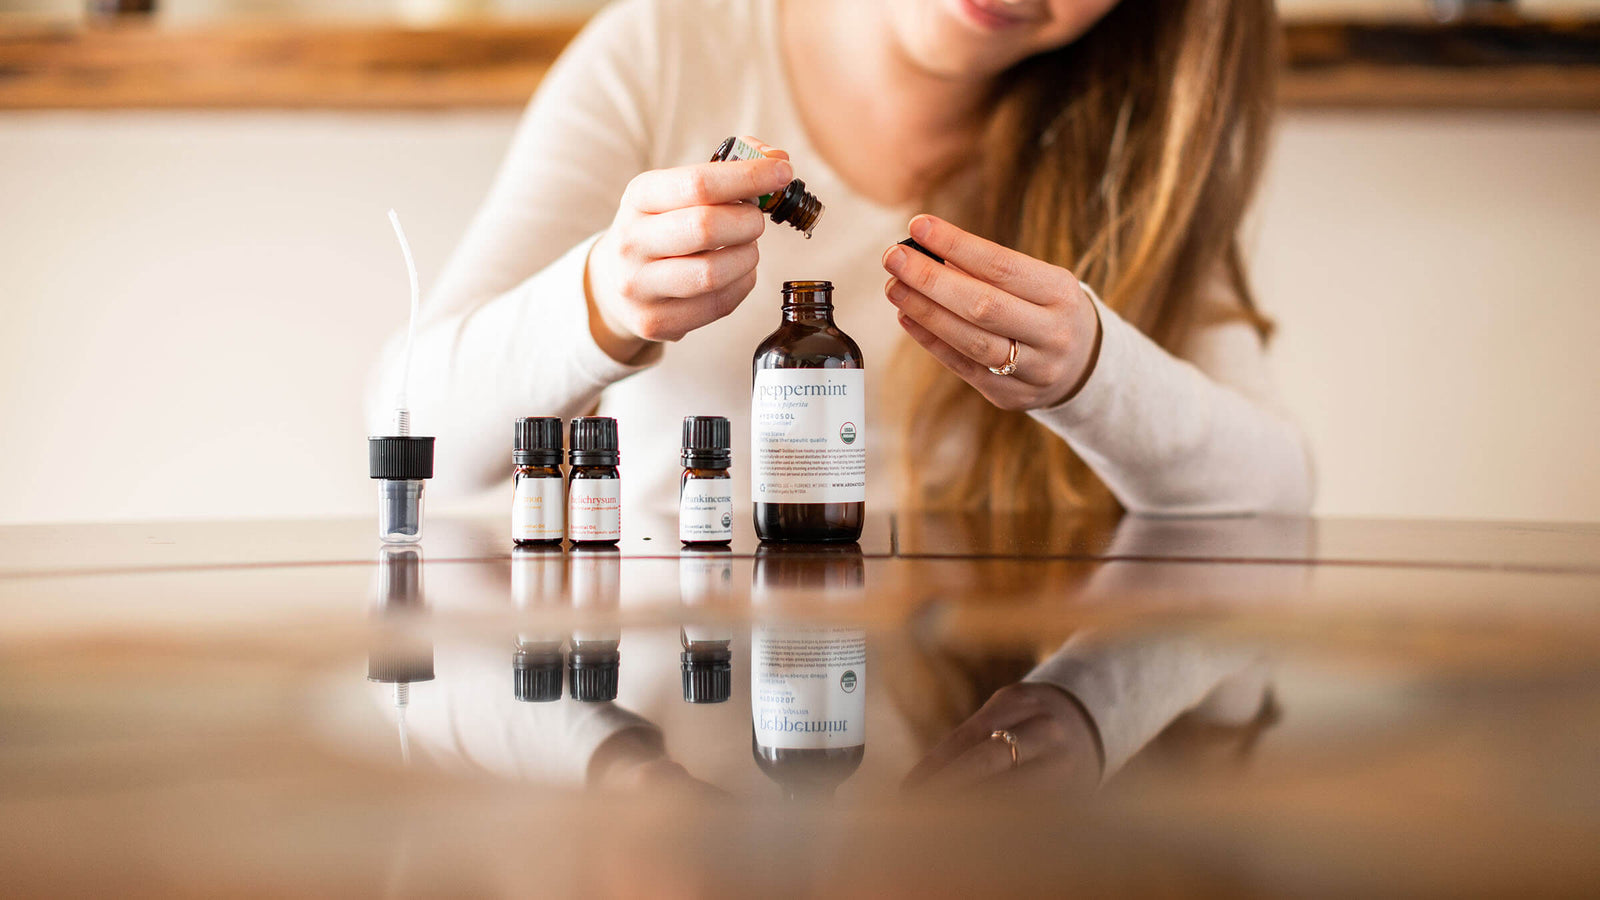 Tips for sustainable use of essential oils